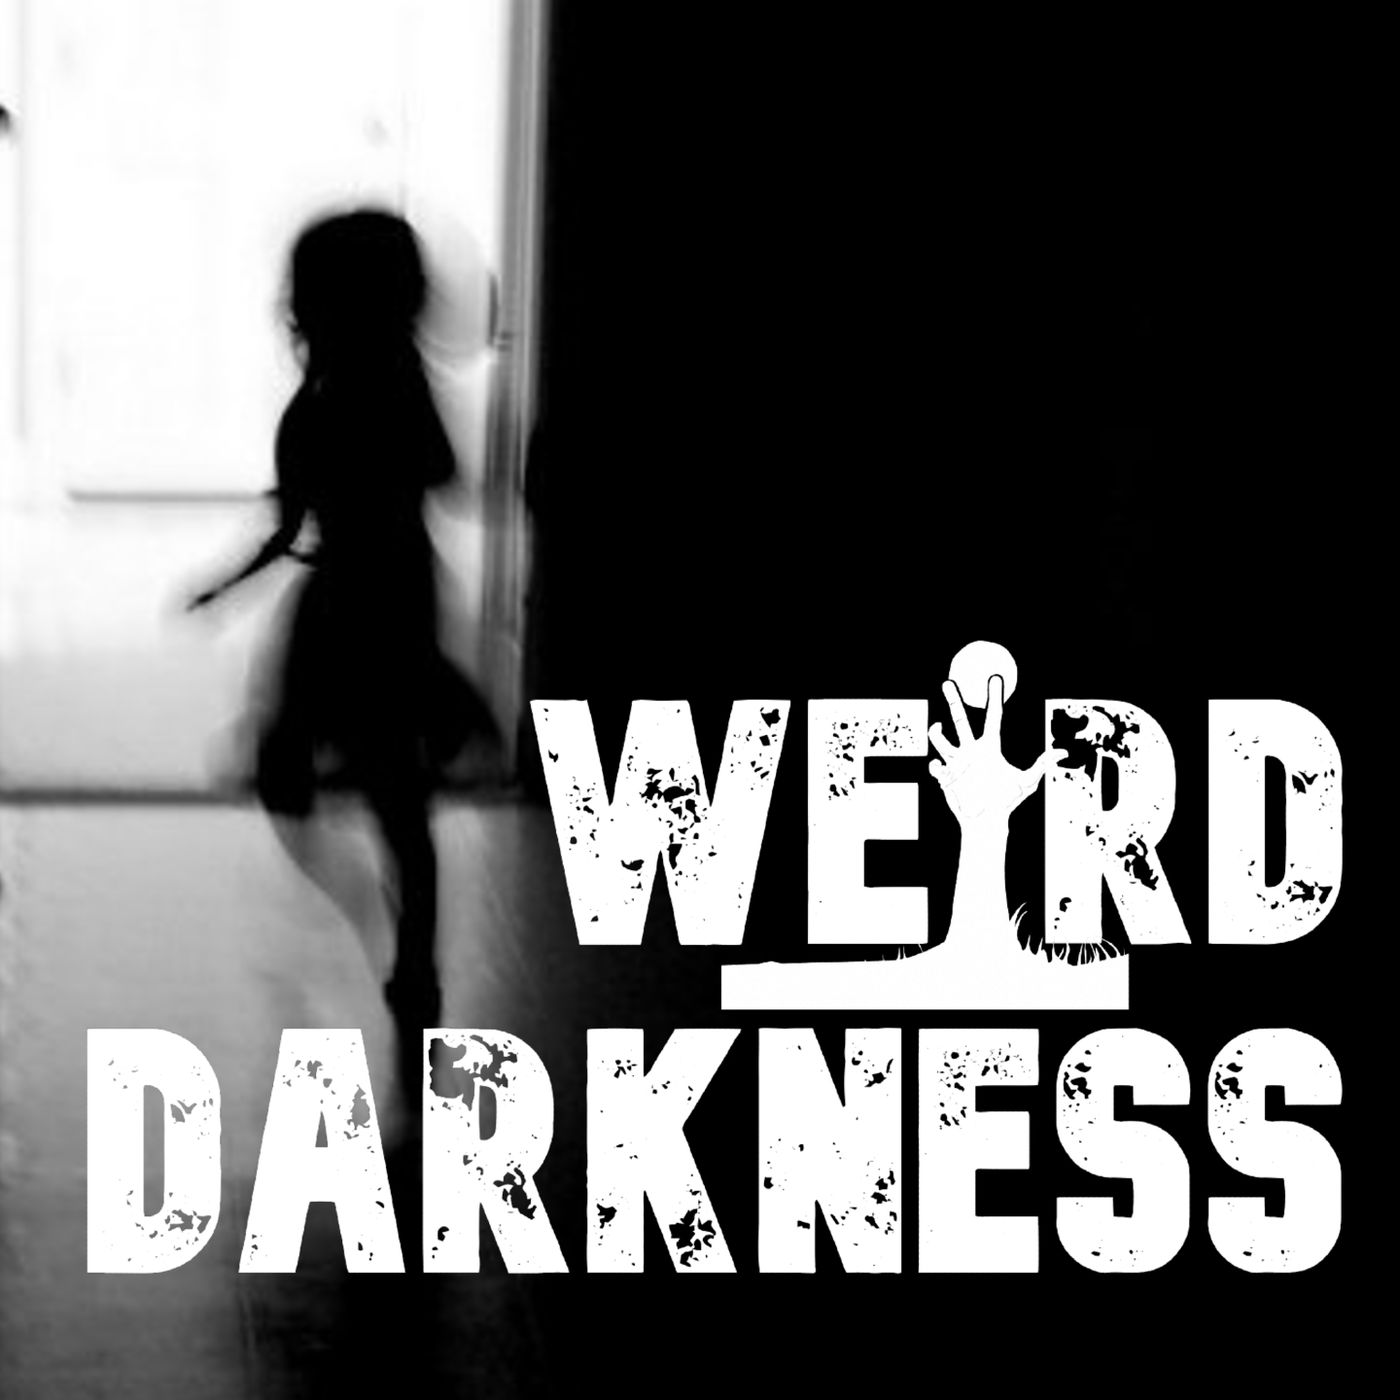 “THE CHILD NOT REALLY THERE” and Other Strange True Stories – PLUS BLOOPERS!! #WeirdDarkness